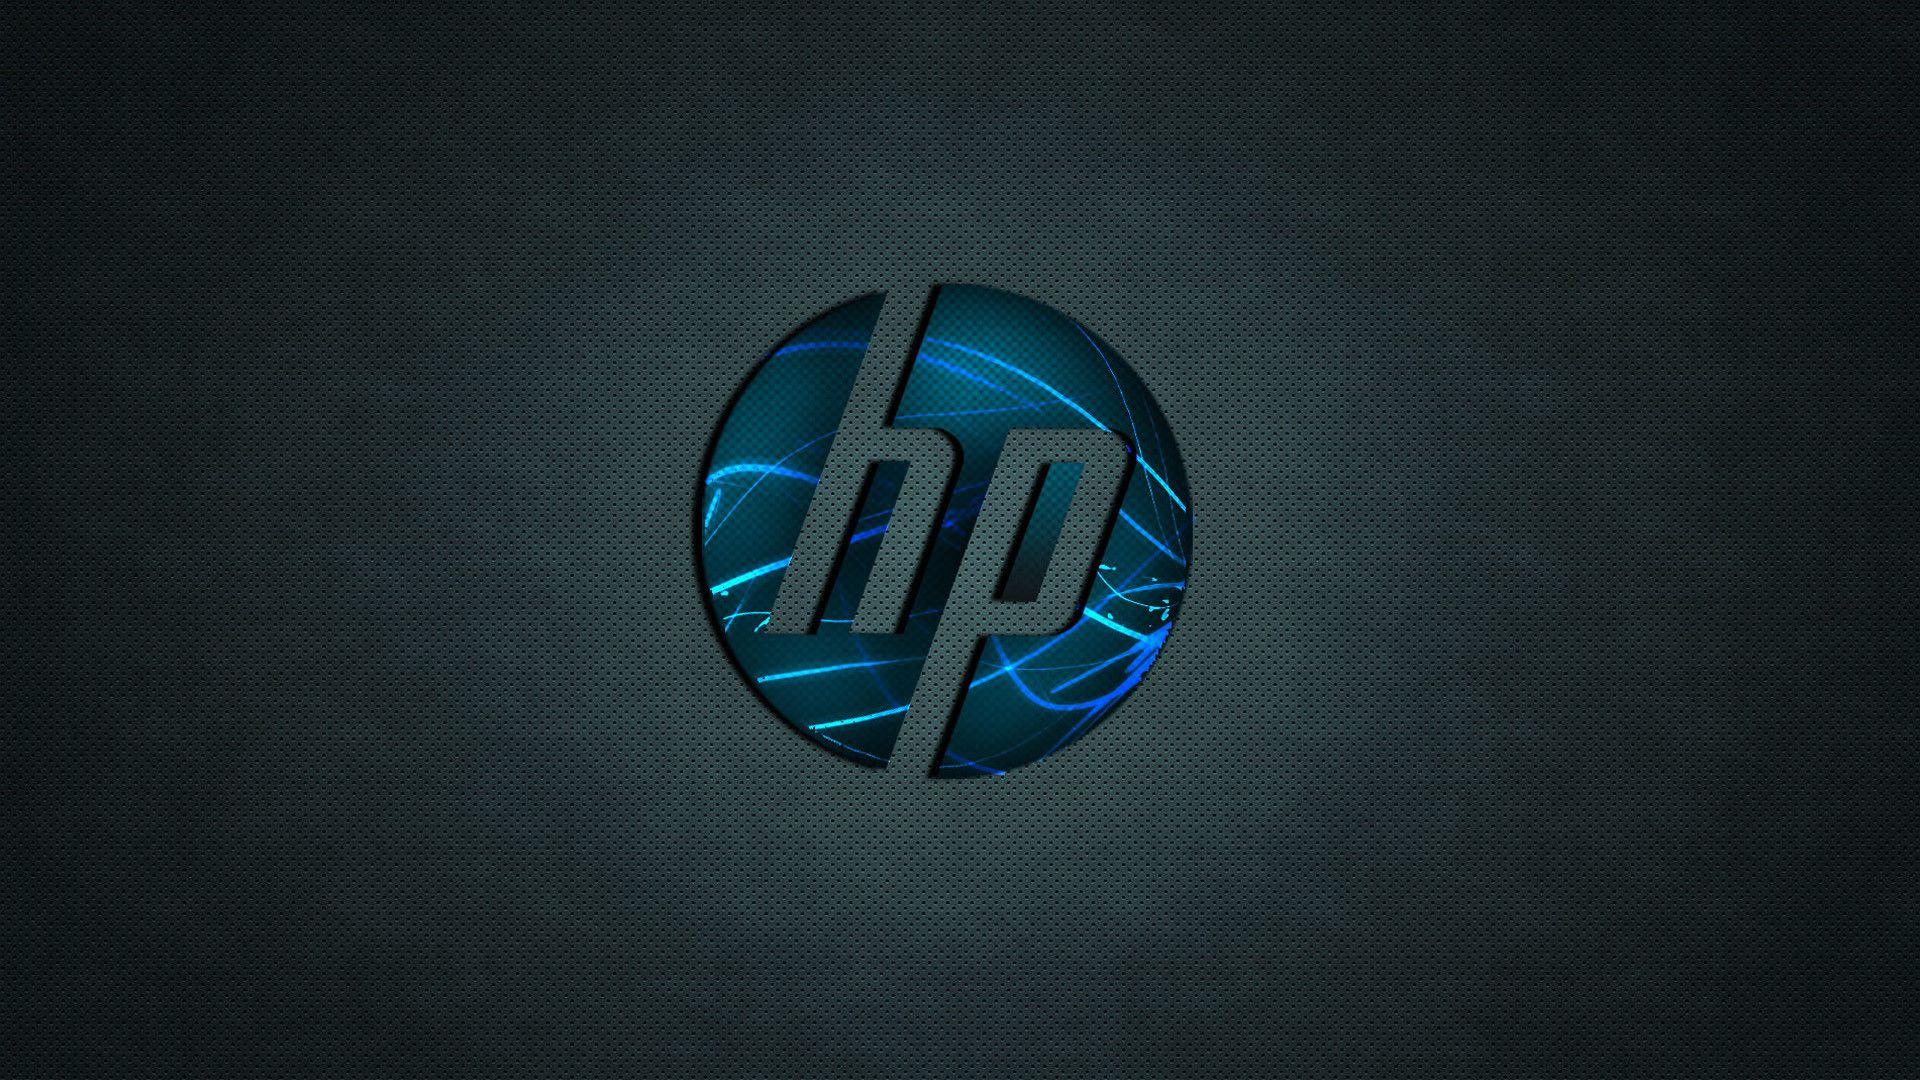 HP Pavilion Wallpapers - Top Free HP Pavilion Backgrounds ...